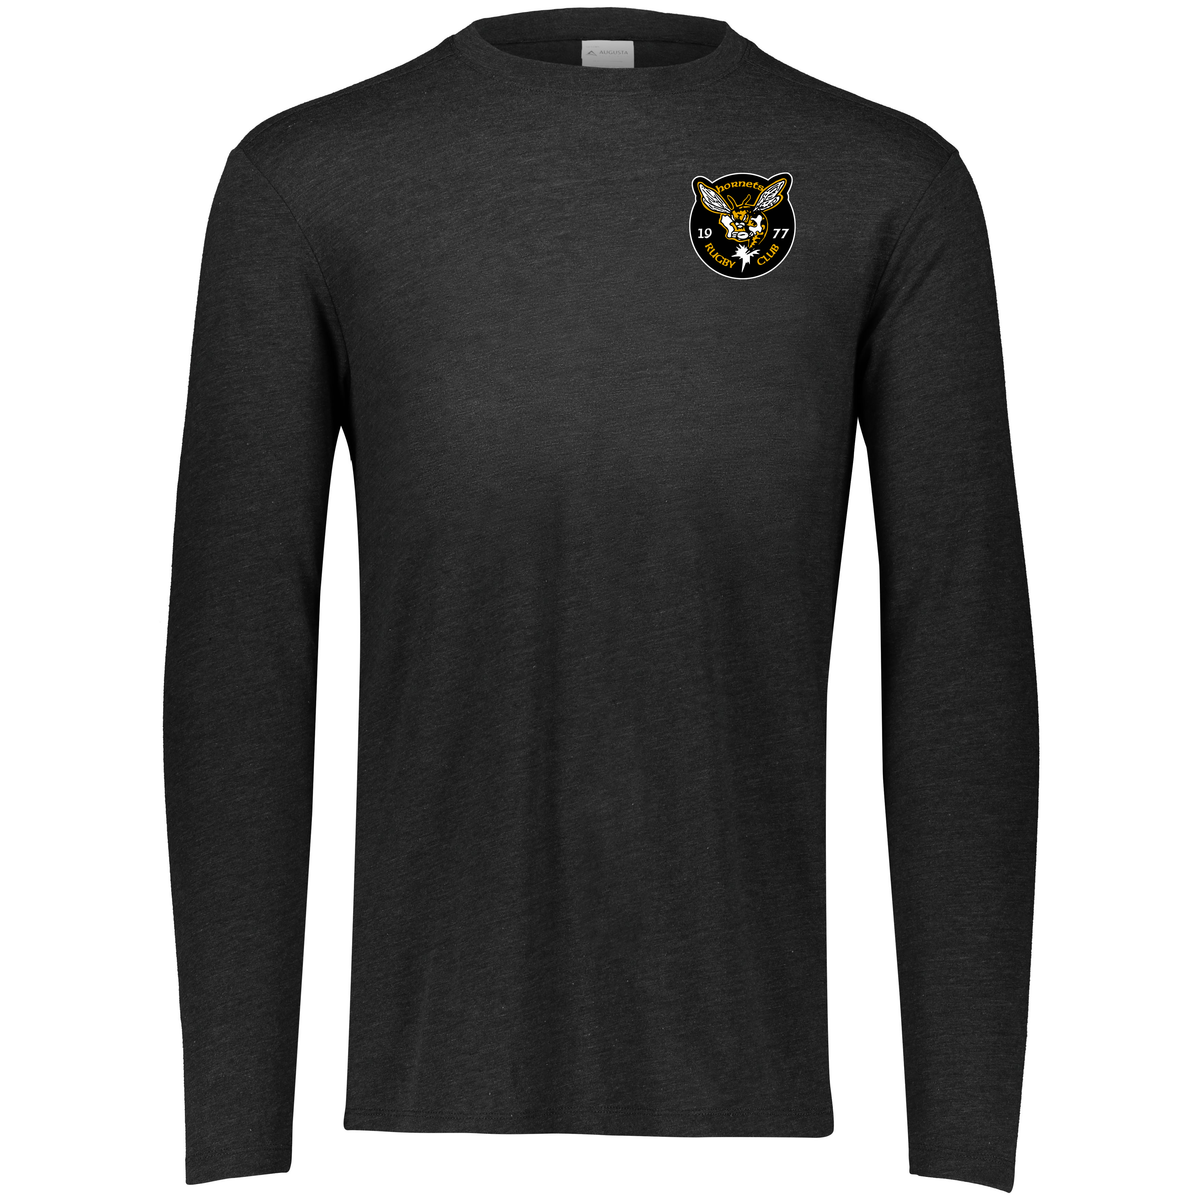 St. Louis Hornets Rugby Club Tri-Blend Long Sleeve Crew